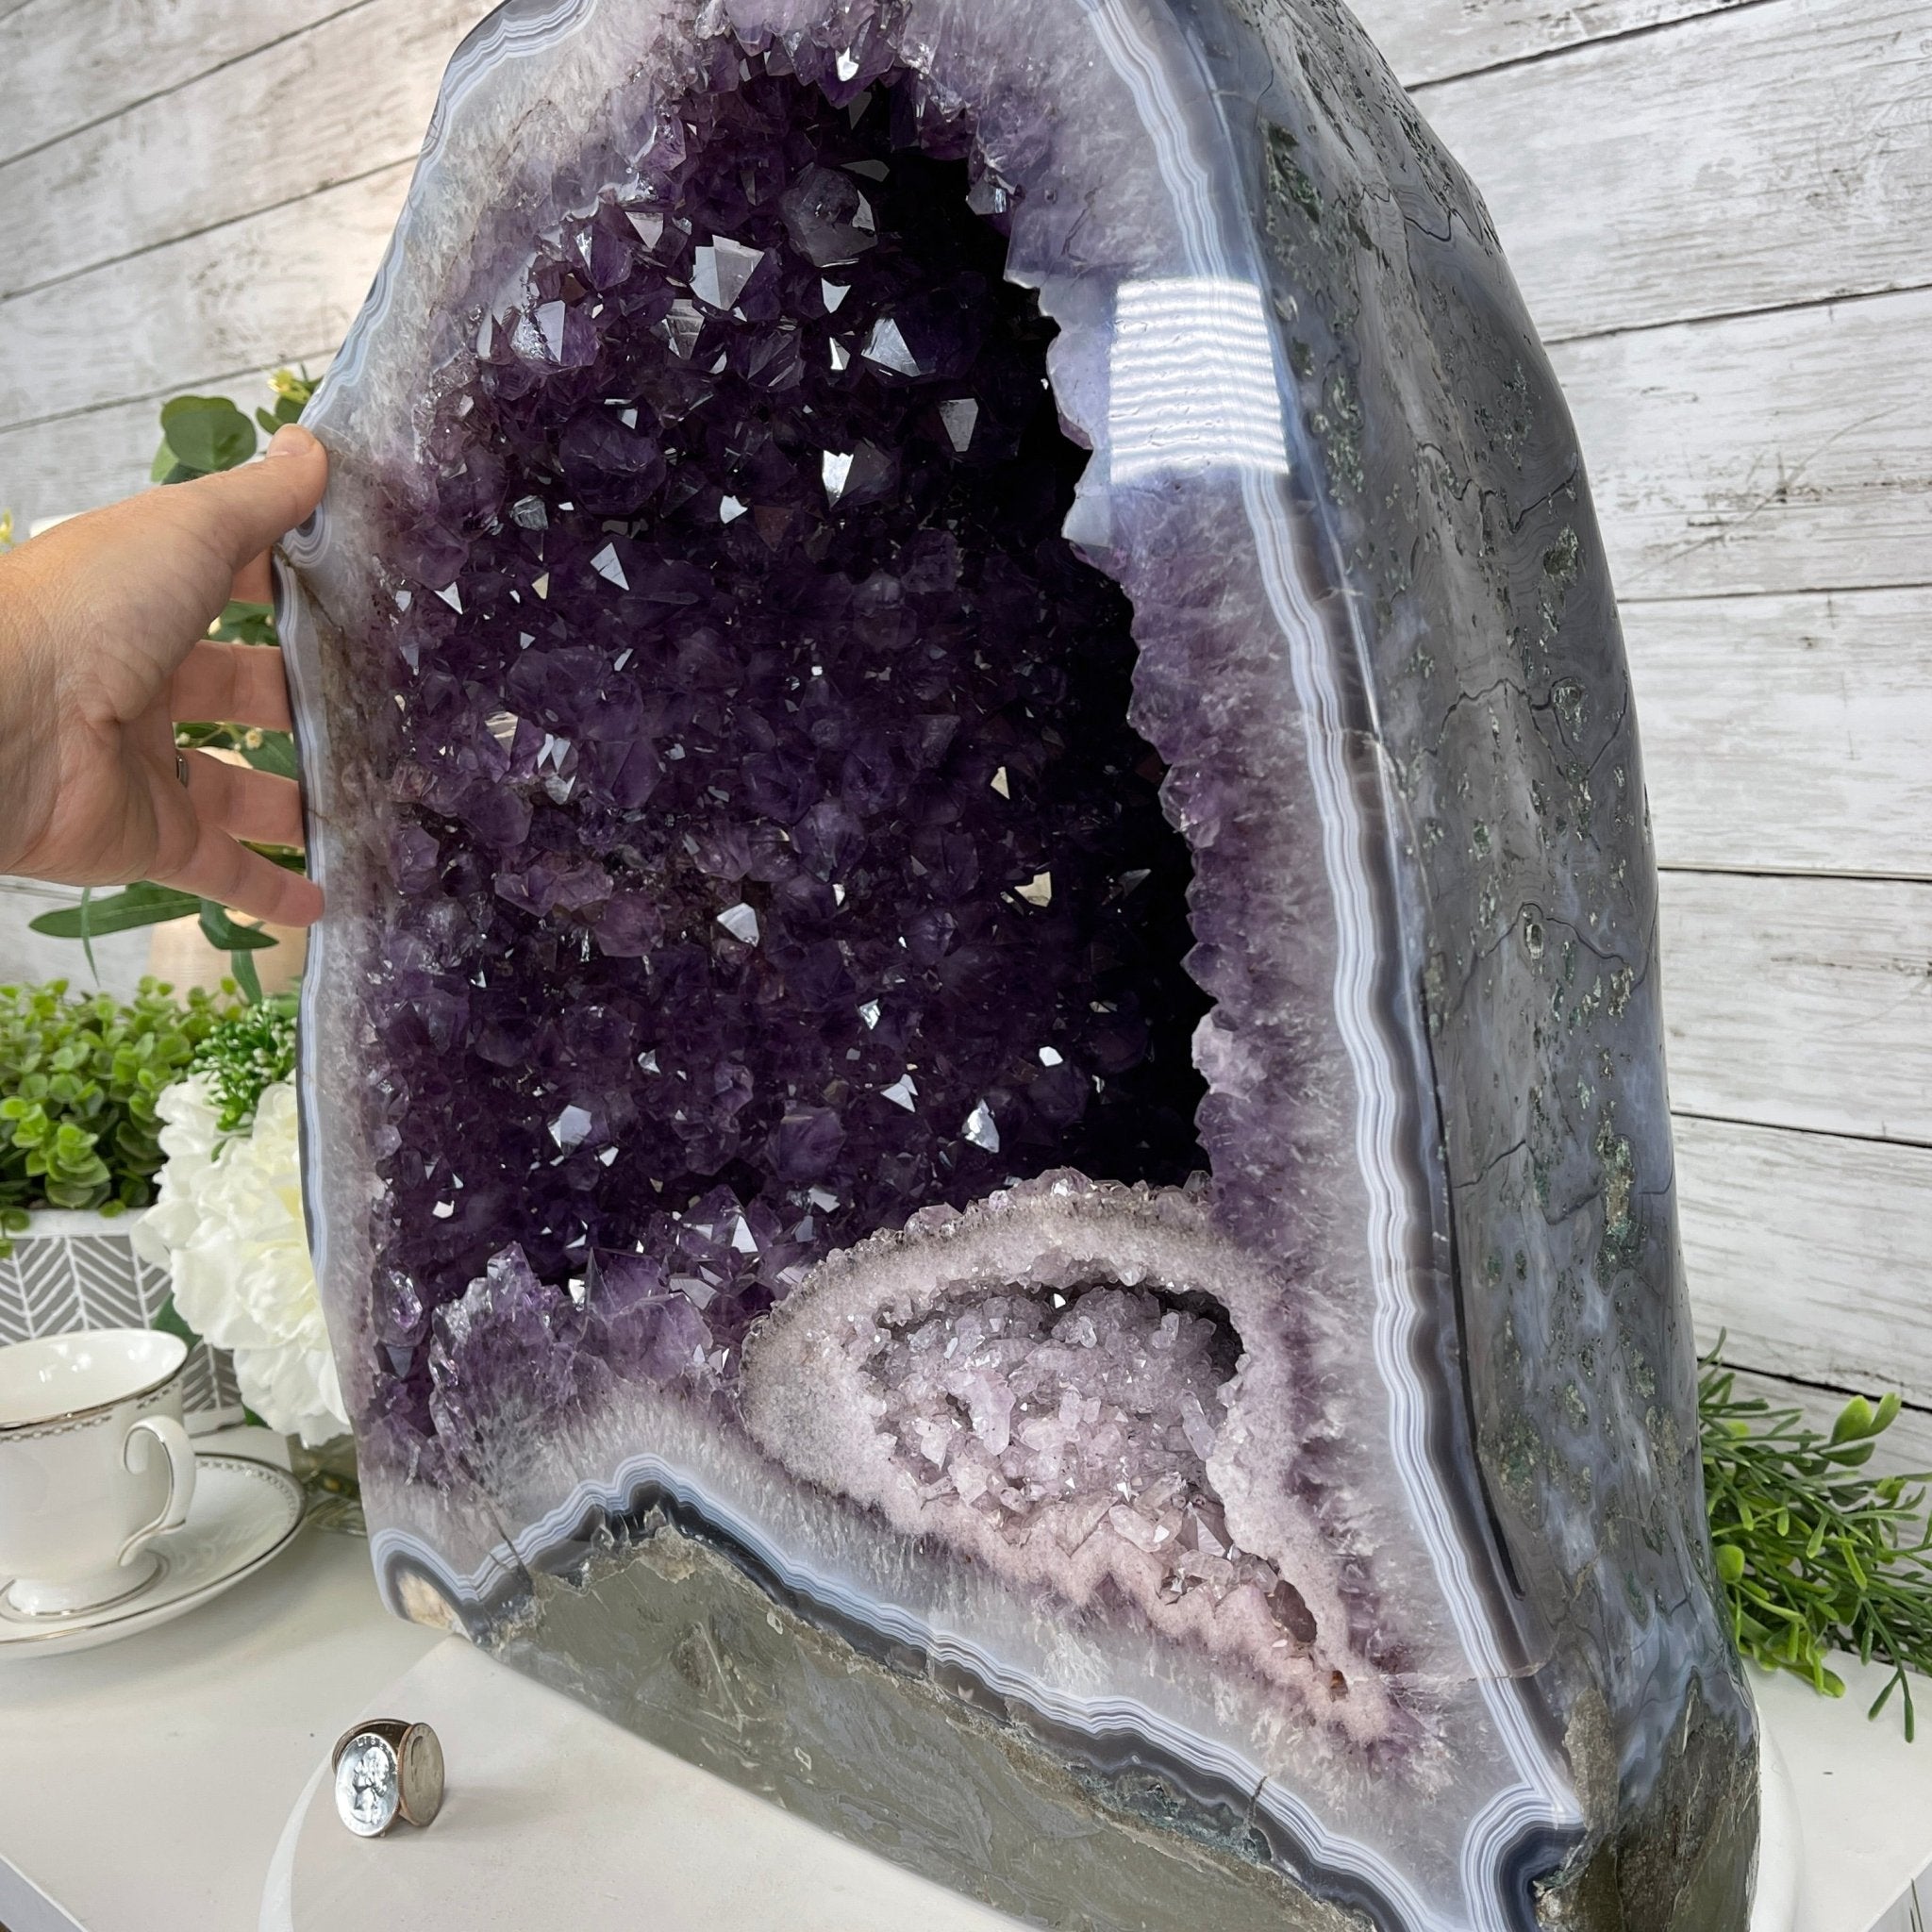 Extra Plus Quality Polished Brazilian Amethyst Cathedral, 89.2 lbs & 18” tall Model #5602-0136 by Brazil Gems - Brazil GemsBrazil GemsExtra Plus Quality Polished Brazilian Amethyst Cathedral, 89.2 lbs & 18” tall Model #5602-0136 by Brazil GemsPolished Cathedrals5602-0136